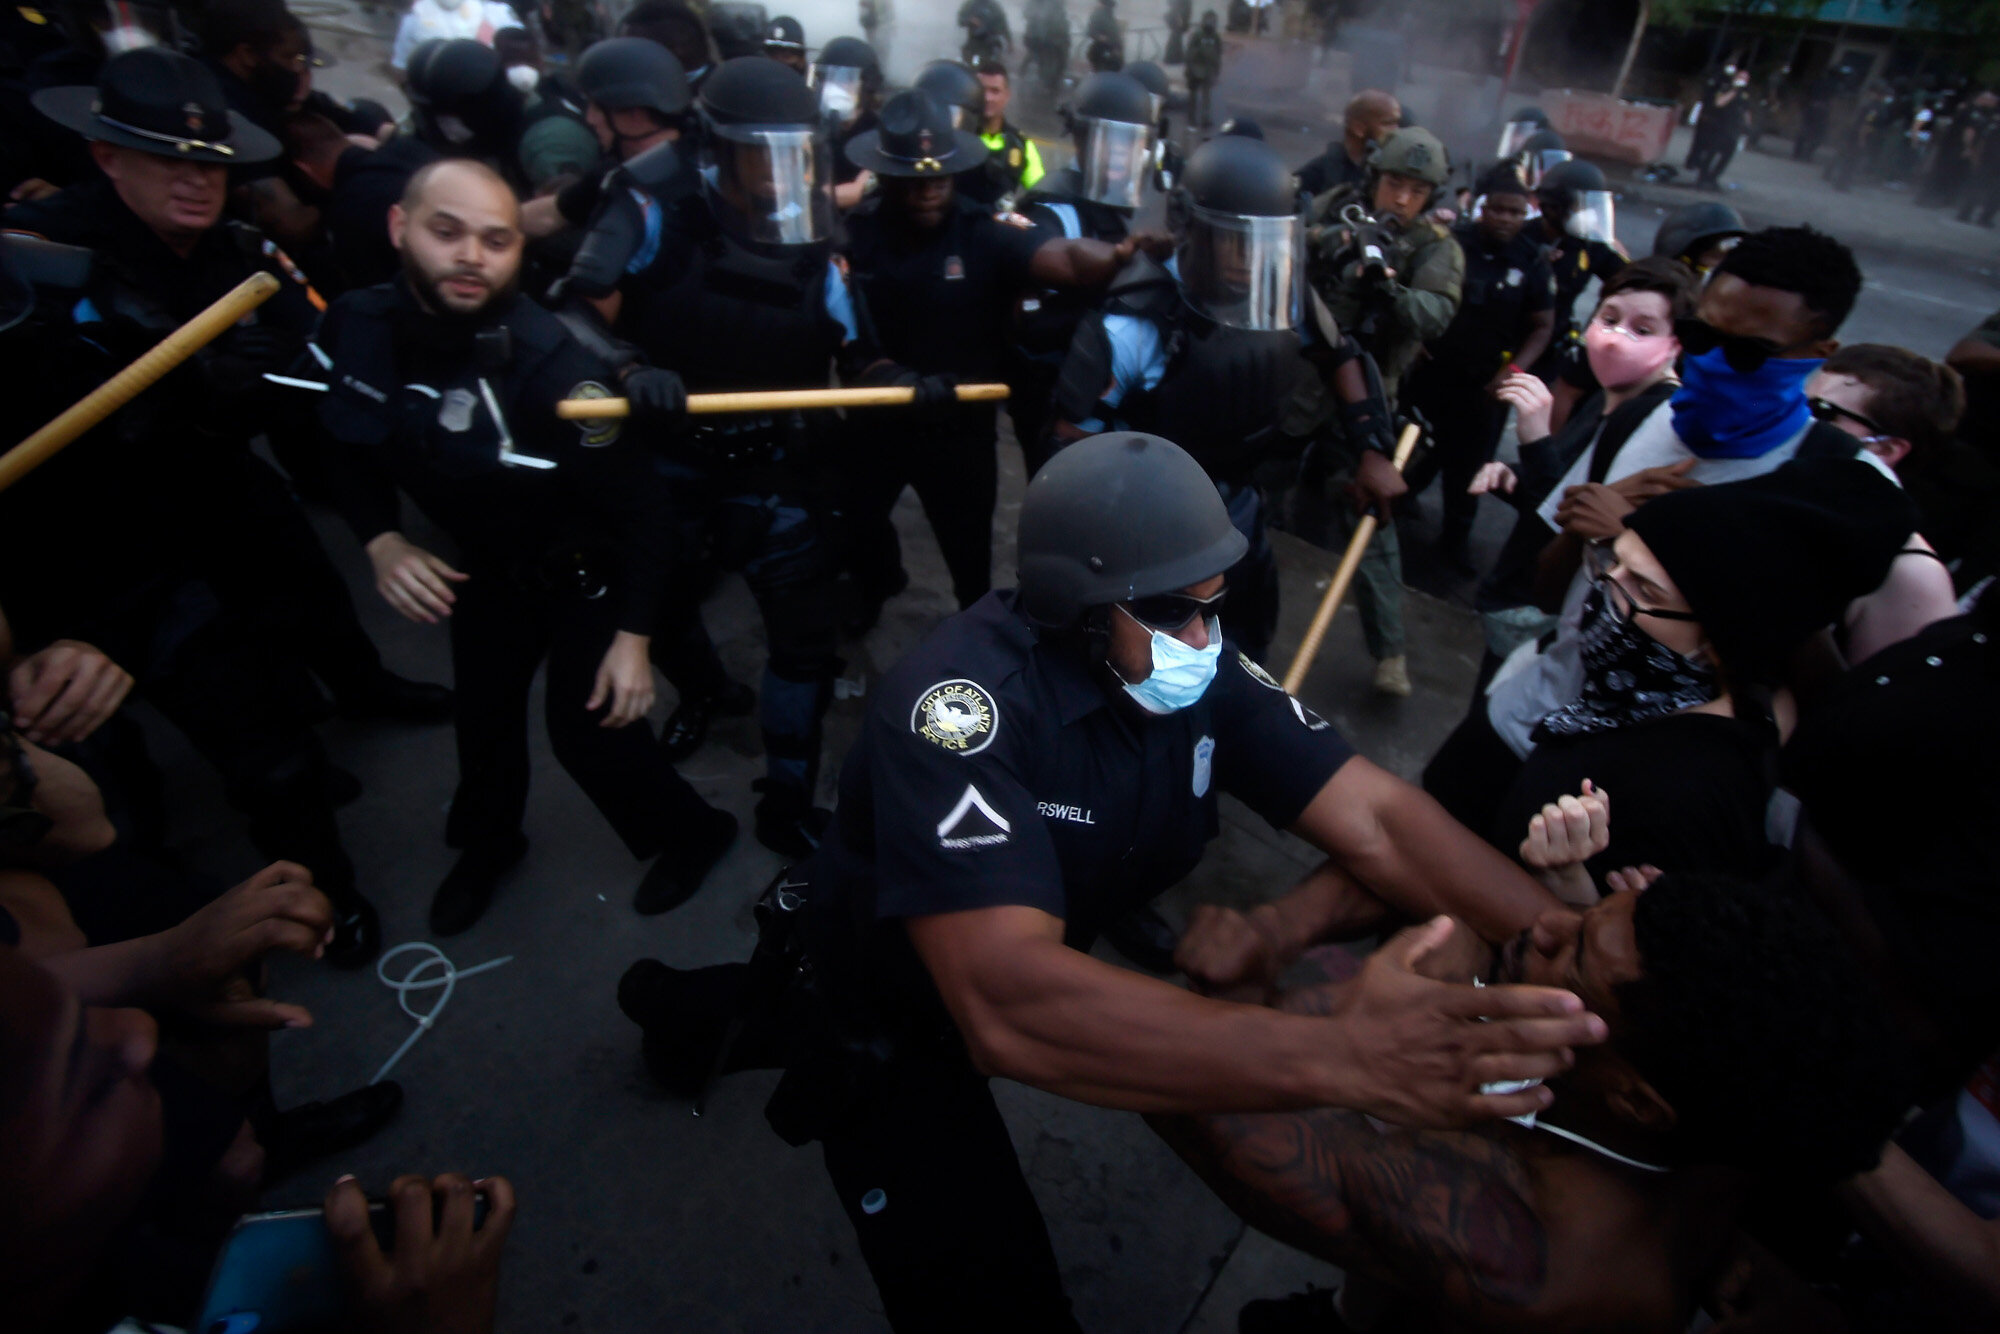  Police officers and protesters clash in Atlanta on May 29, 2020, during a protest in response to George Floyd's death in police custody in Minneapolis. Floyd, a Black man, died after a white police officer pressed a knee into his neck for several mi